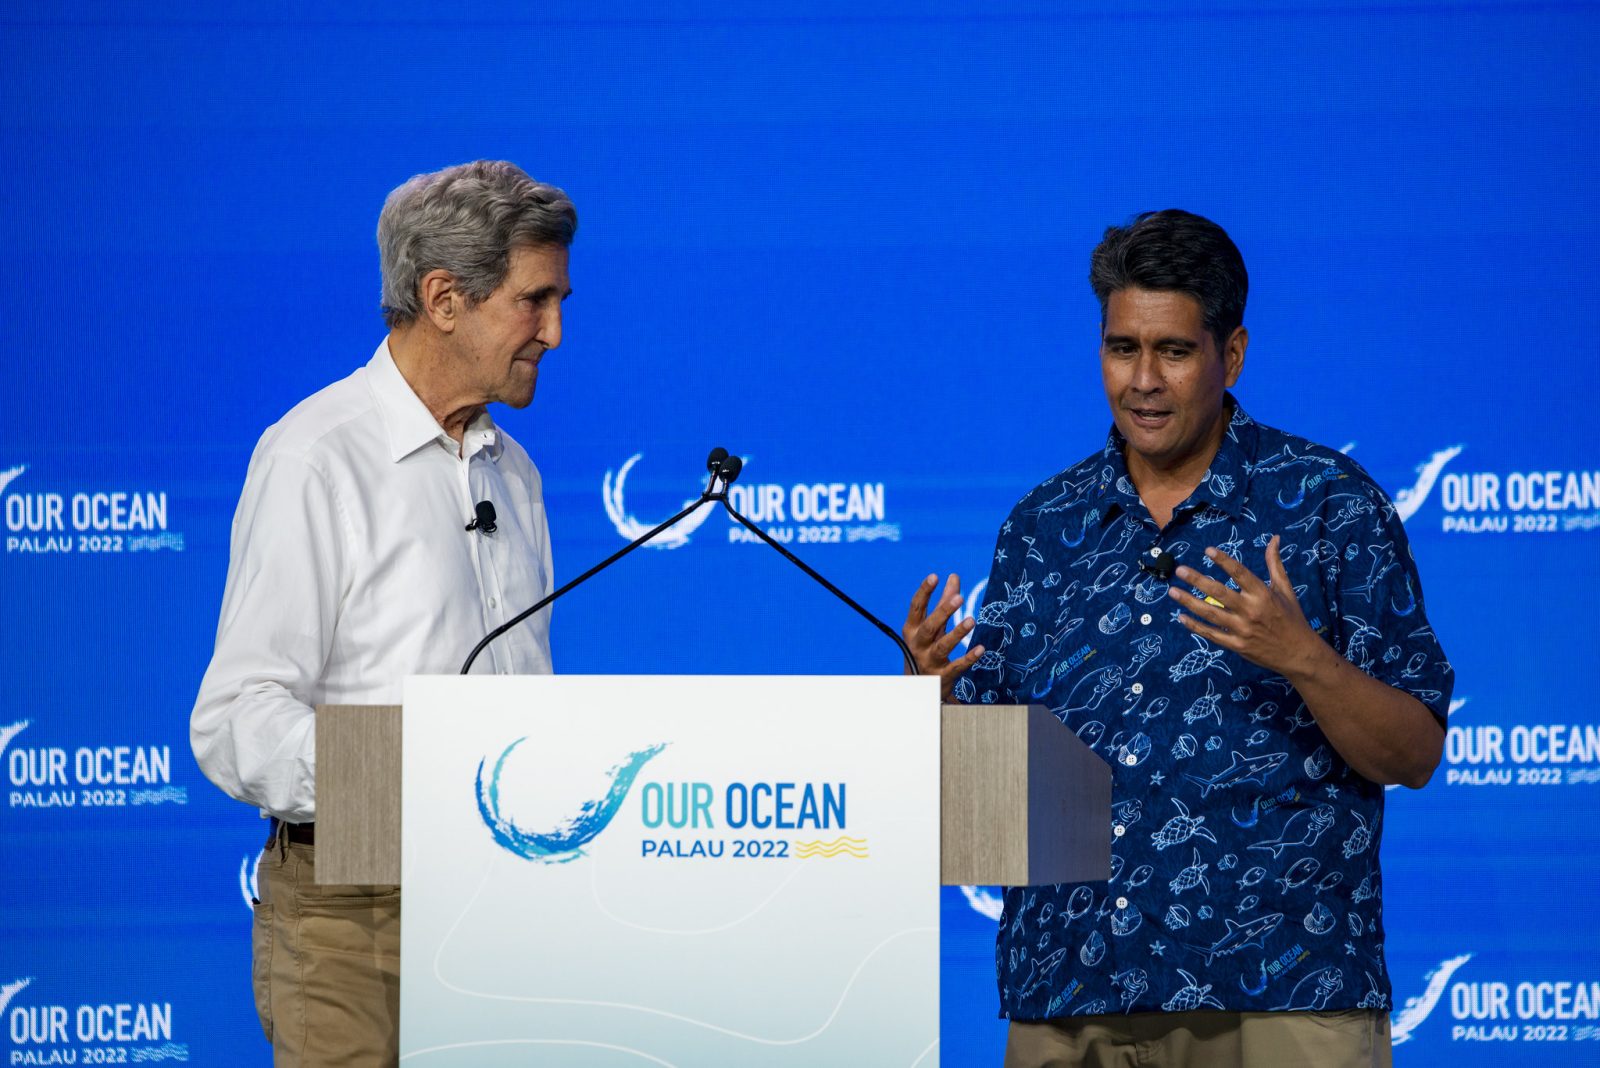 kerry-whipps-ocean-conference-palau